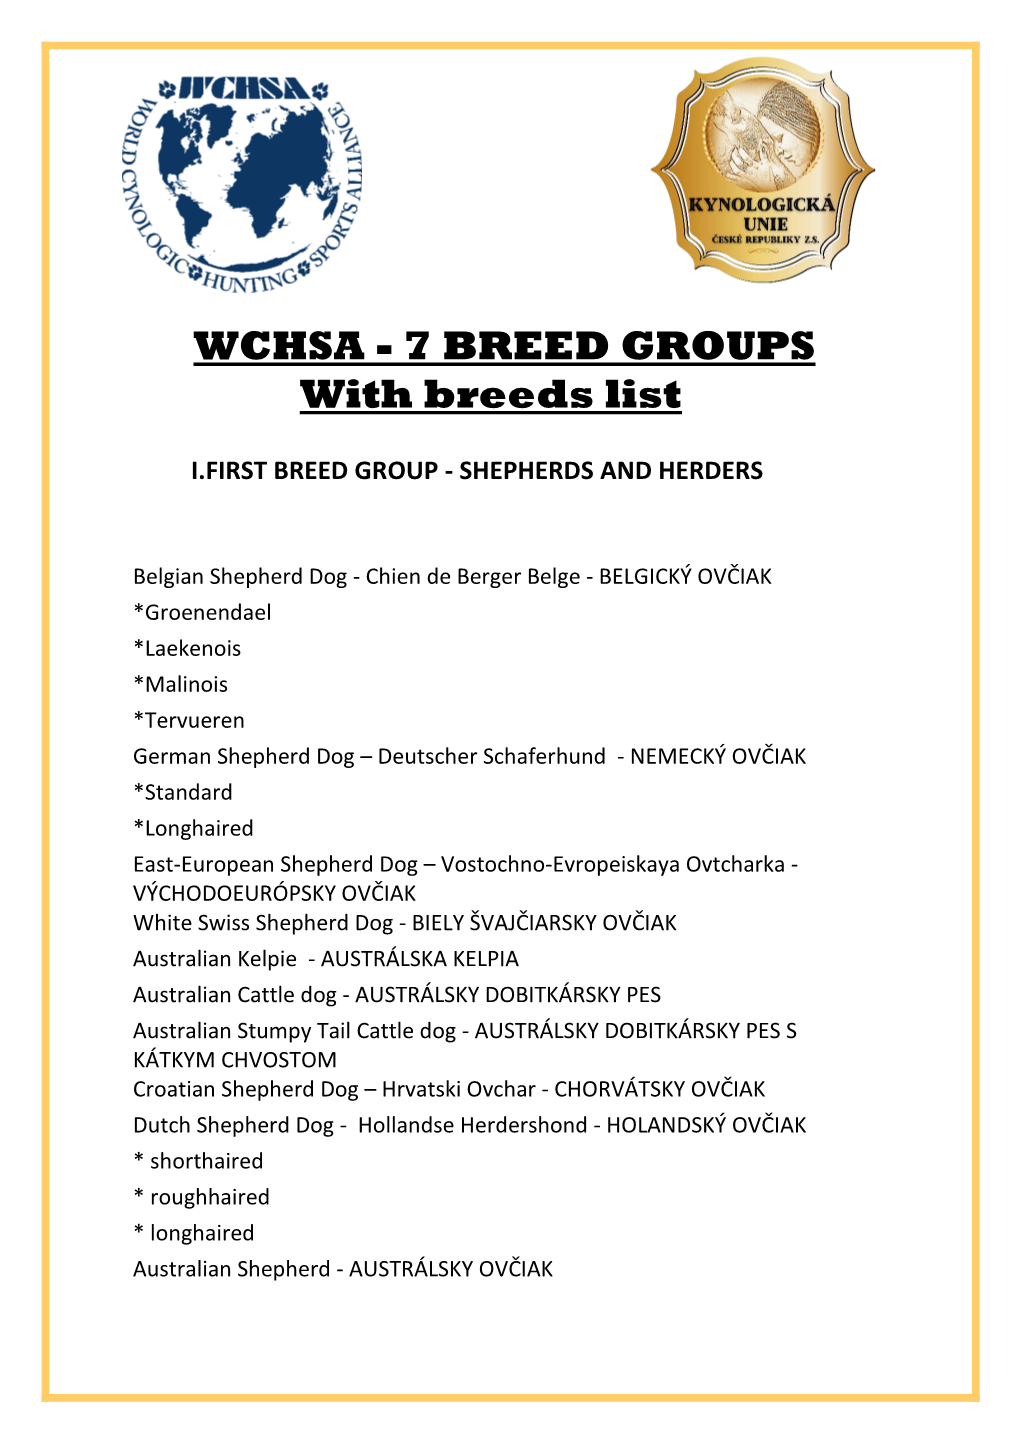 WCHSA - 7 BREED GROUPS with Breeds List